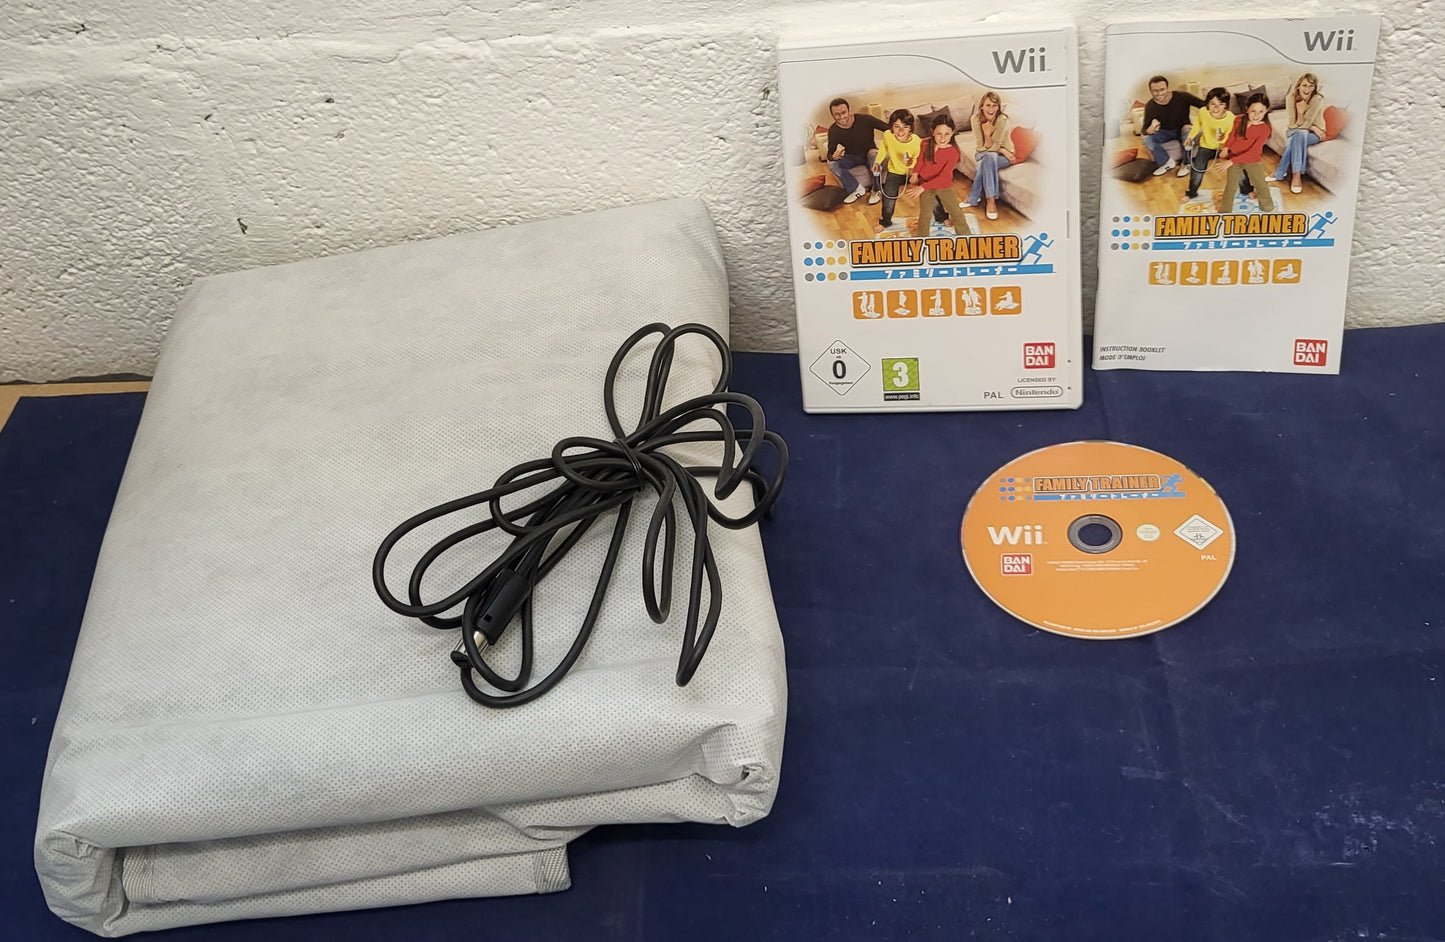 Boxed Family Trainer Nintendo Wii Game and Accessory